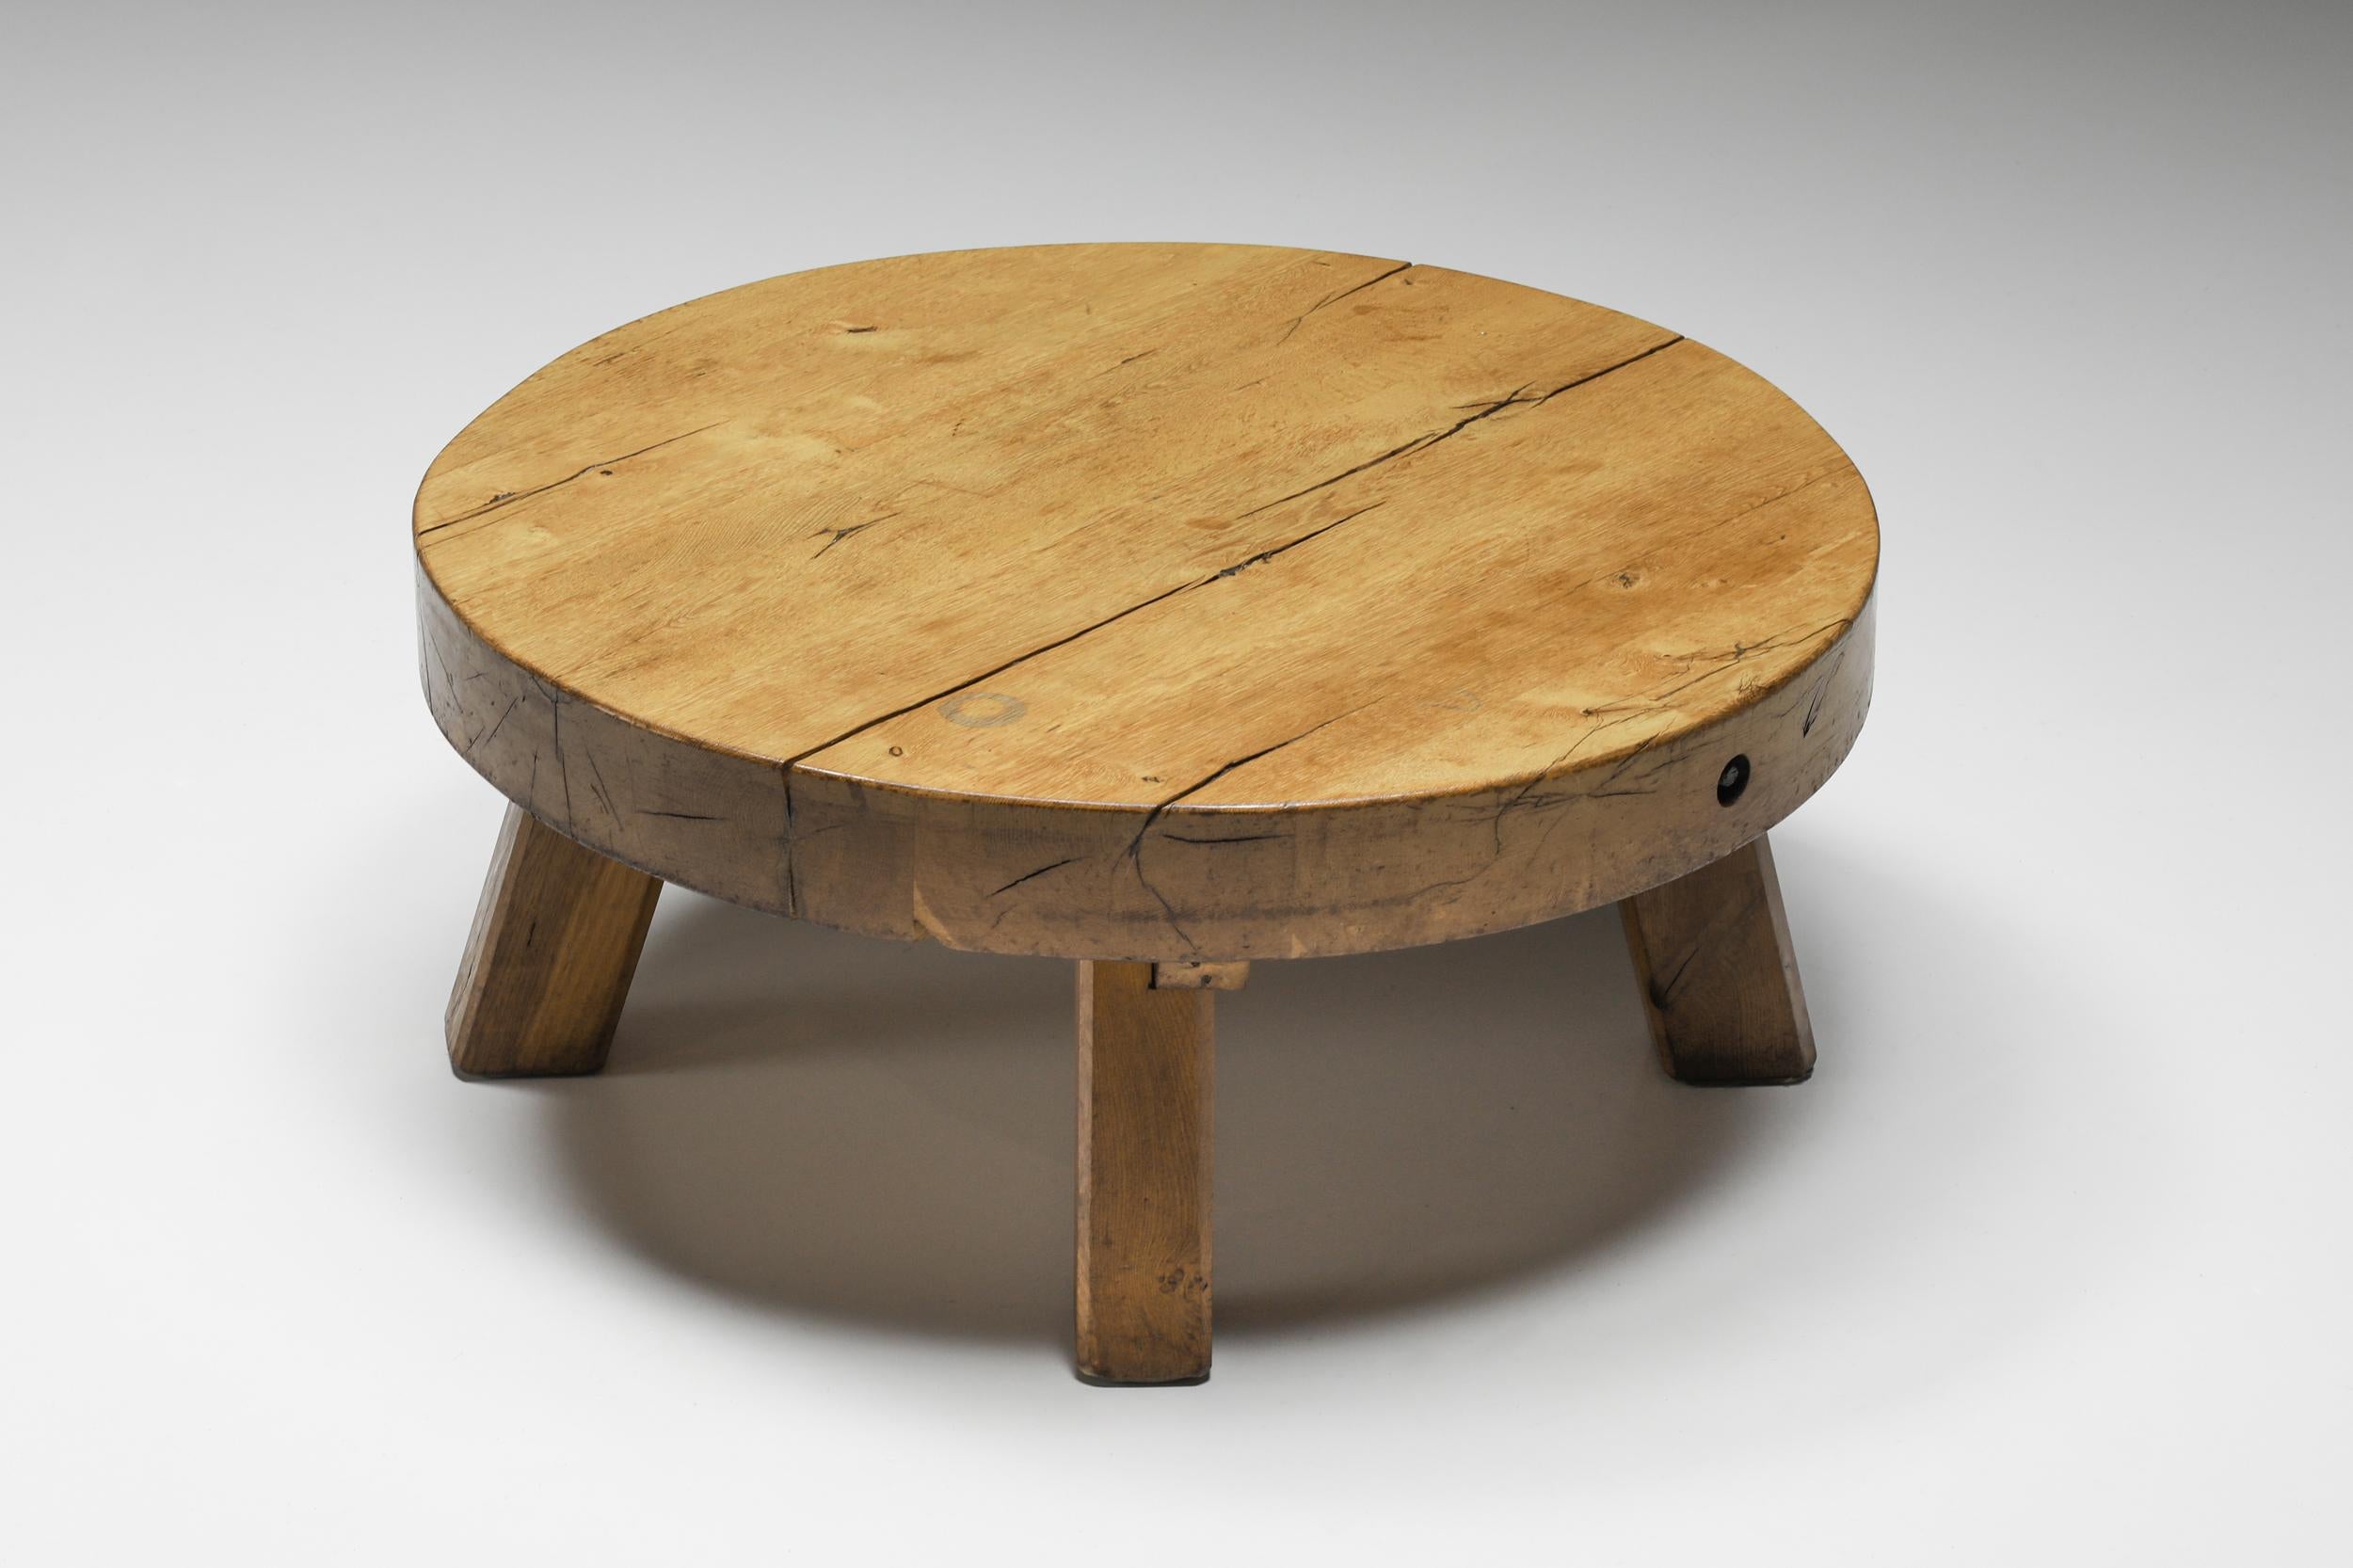 Round rustic wooden coffee table, France, 1950's.

This rustic round coffee table with a four-legged base is made of solid wood. The rounded surface provides space for objects like magazines and other curiosities. Can also be used as a side table.